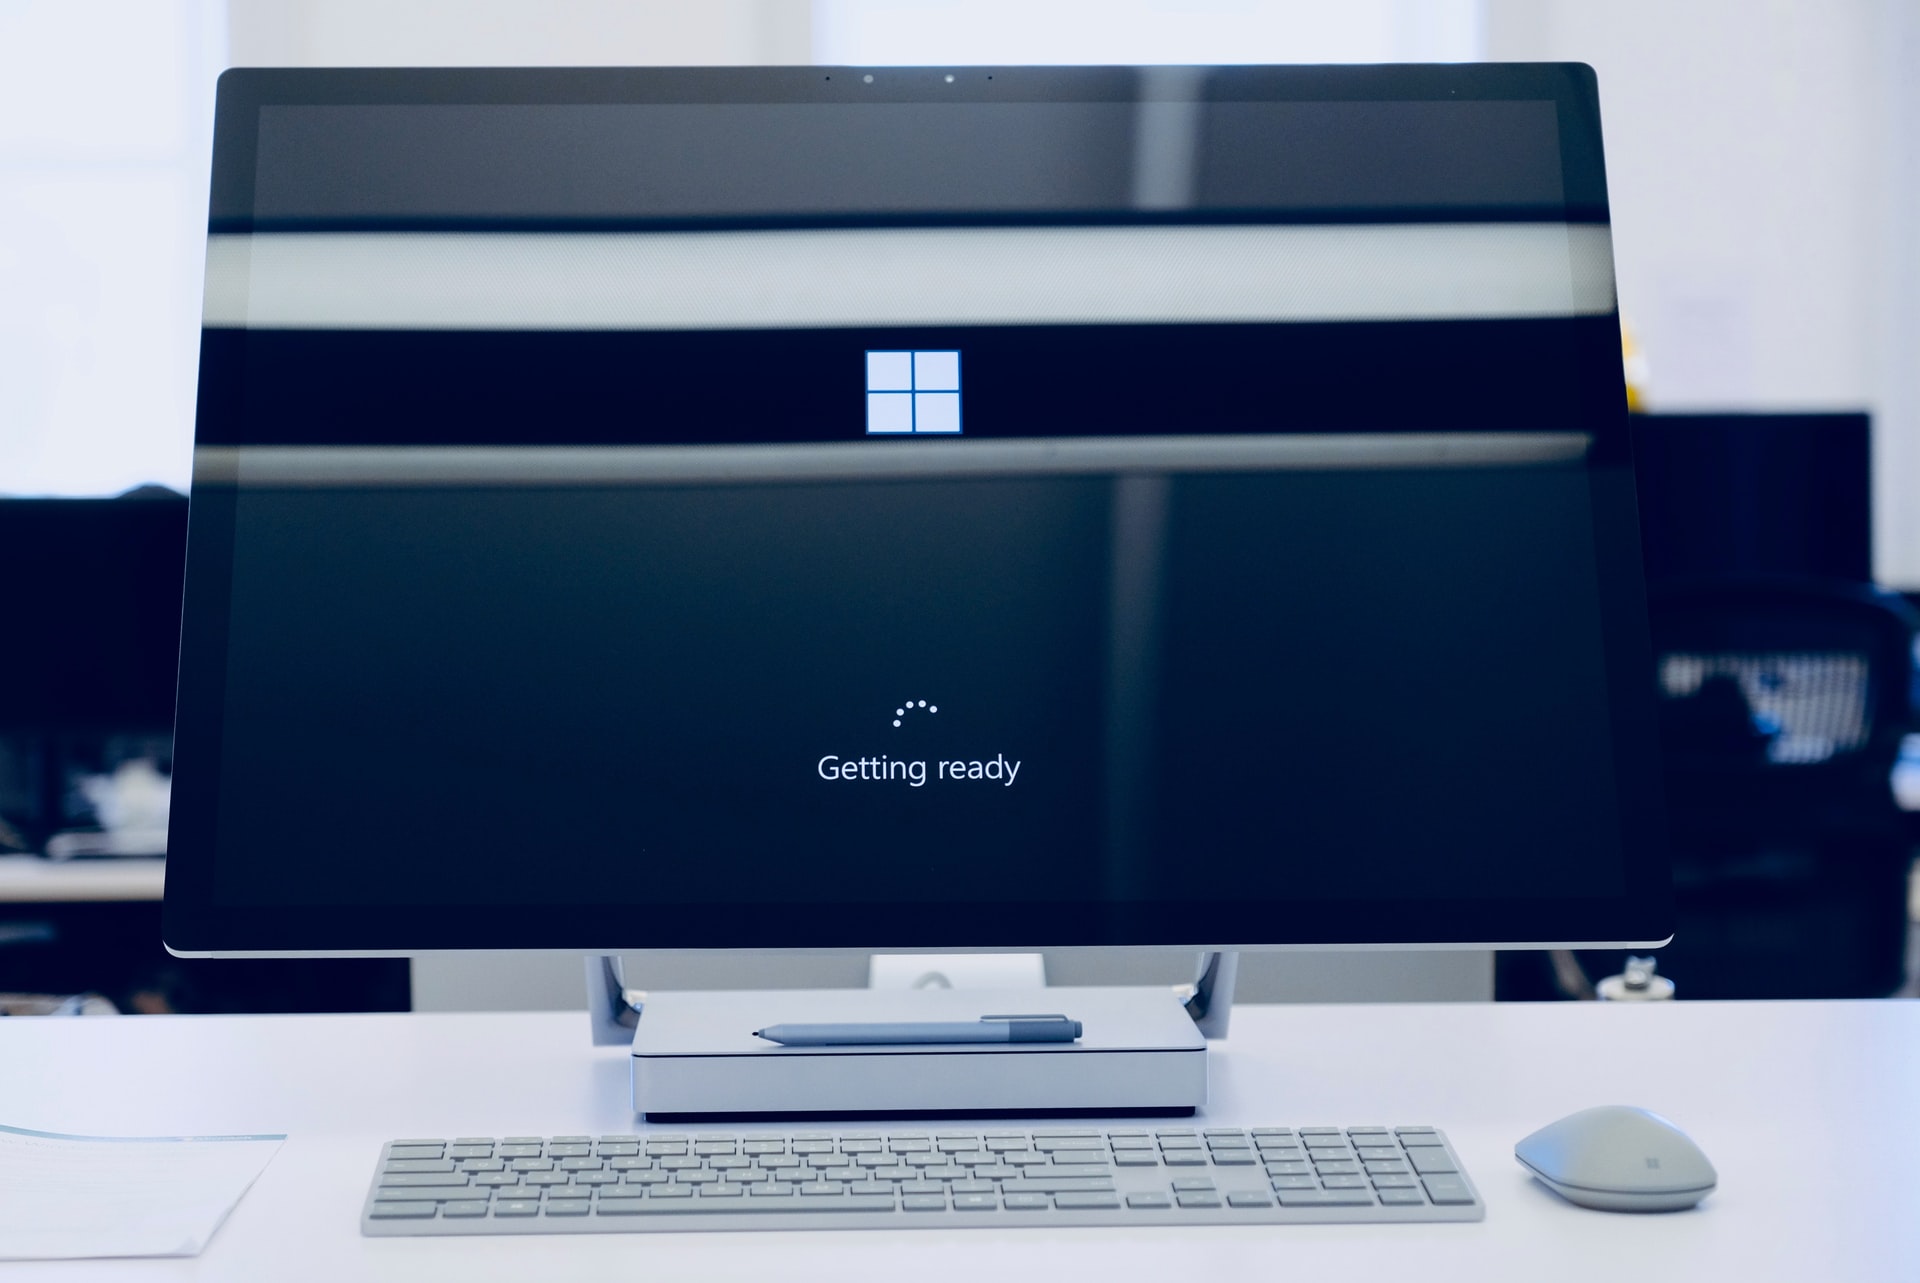 Microsoft has come up with another clever way to get users to upgrade to Windows 11